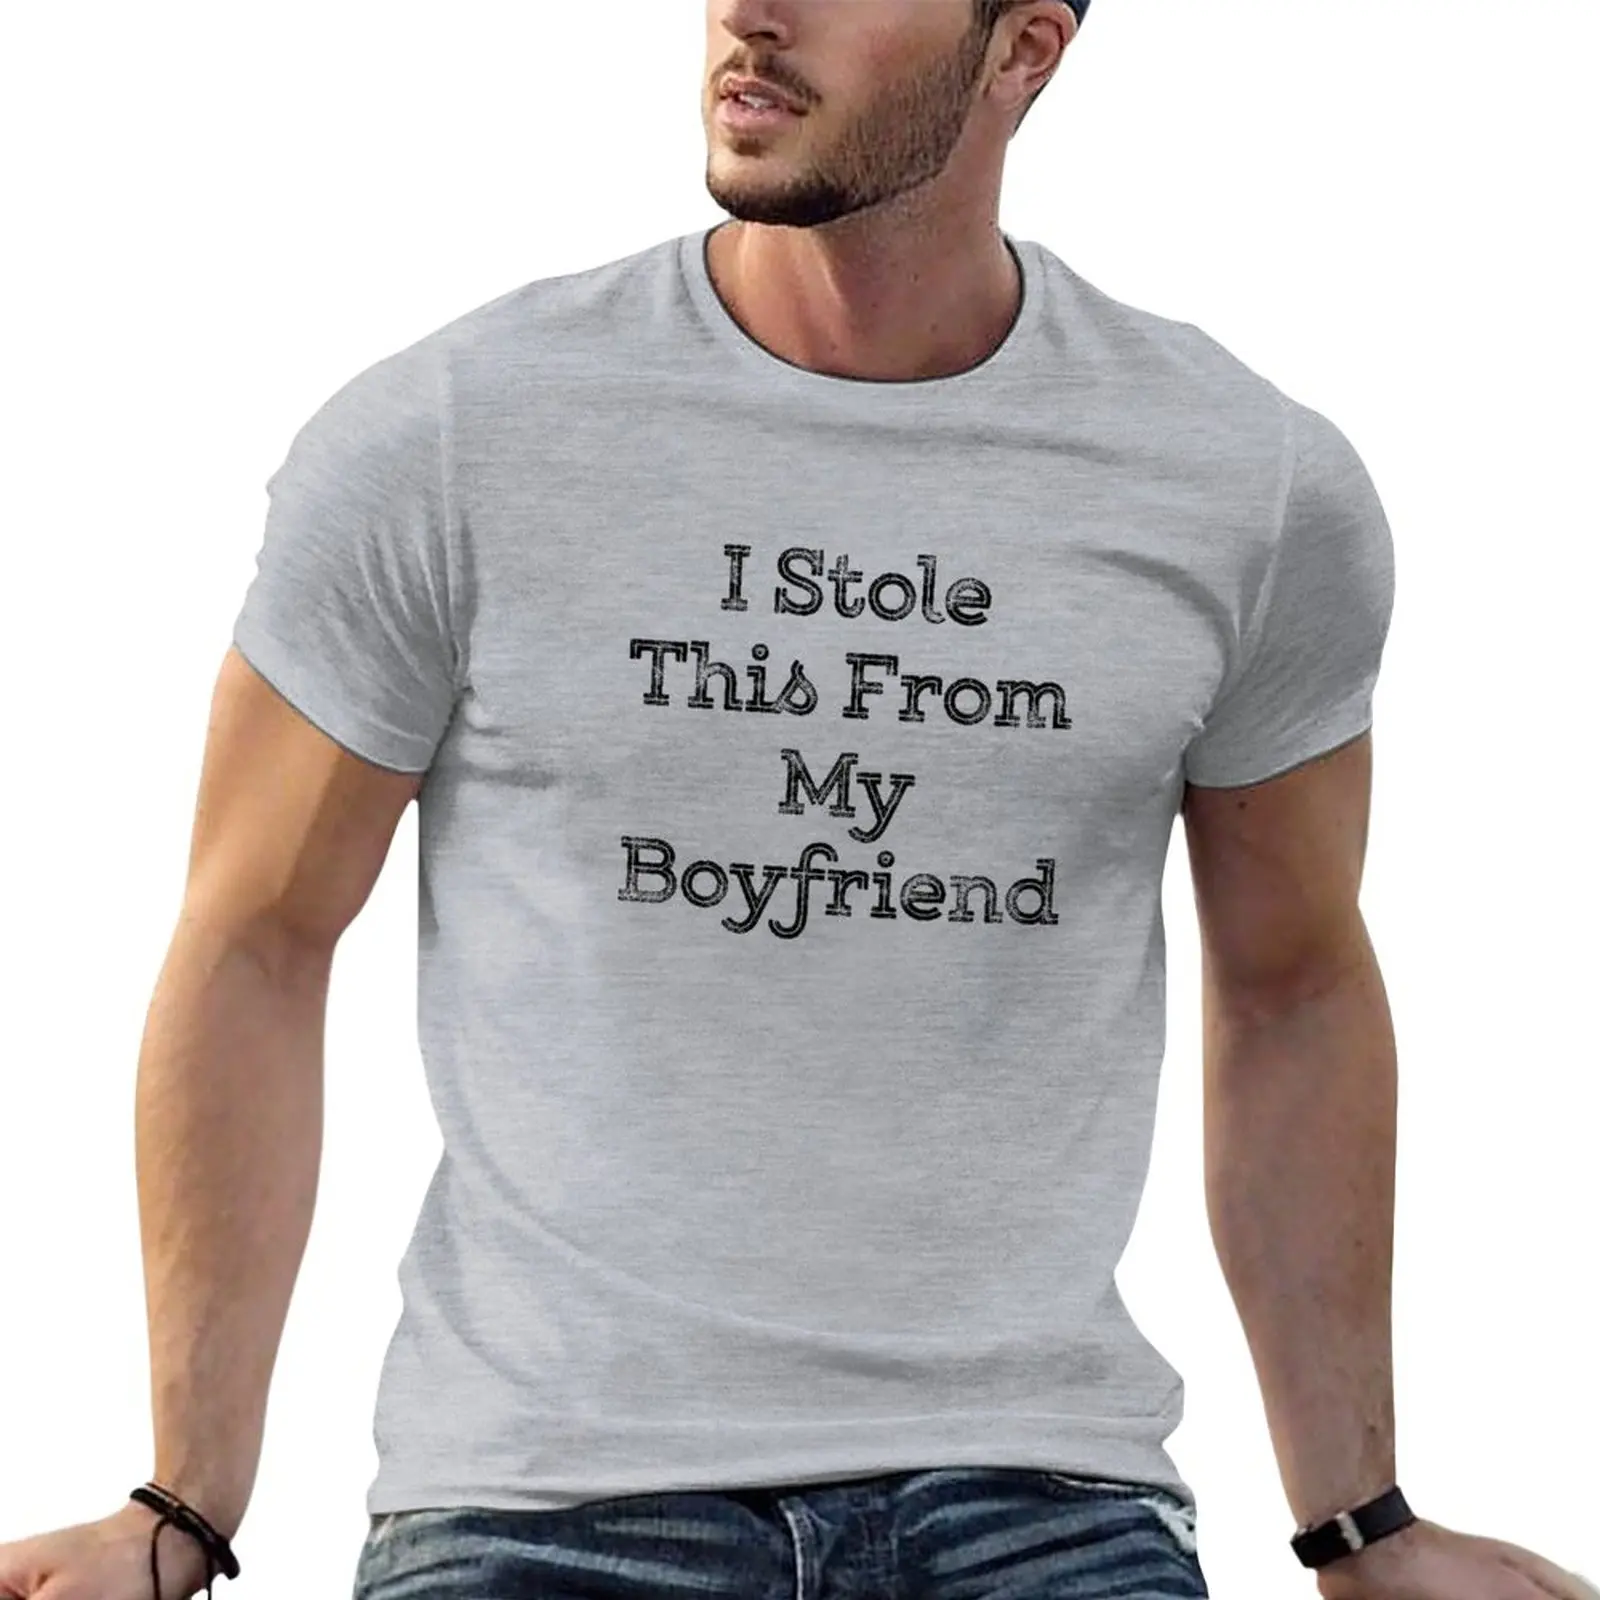 

I Stole This From My Boyfriend Gift T-Shirt black t shirts plus size t shirts plain black t shirts men